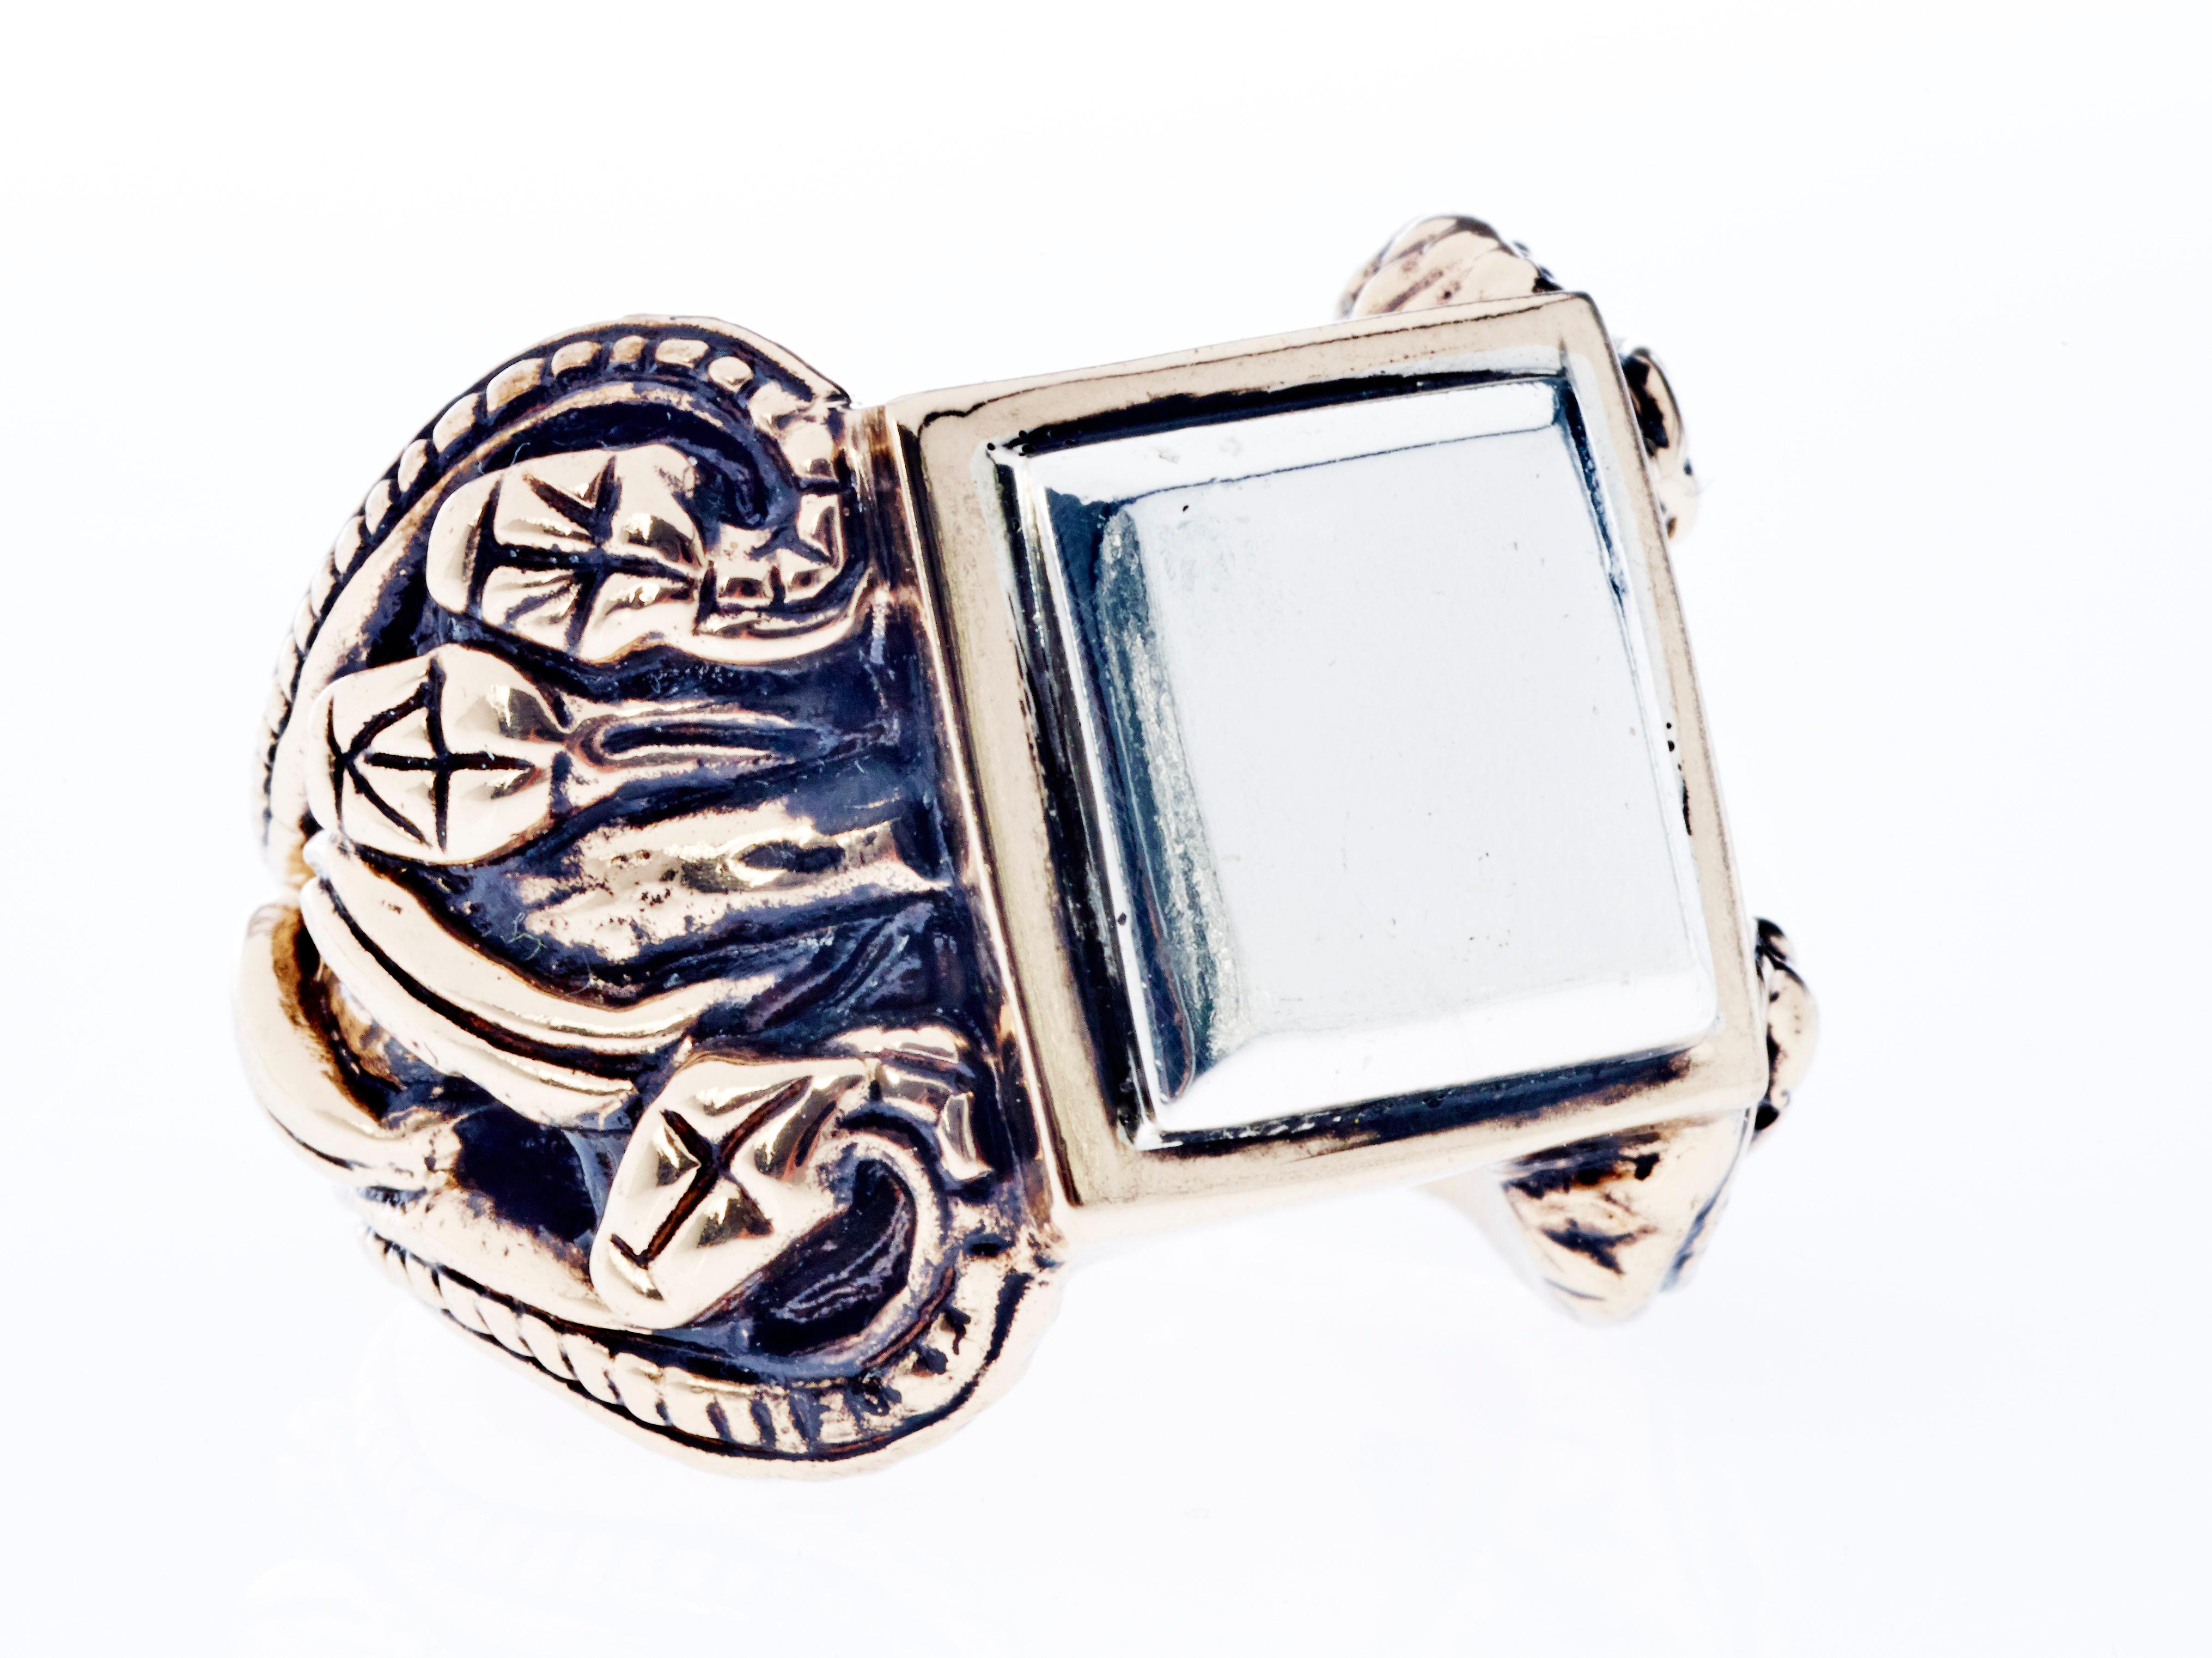 Crest Snake Ring Victorian Style Antique Silver Gold Vermeil J Dauphin

J DAUPHIN statement ring made in Gold Vermeil and silver with antique plating.

The serpent, or snake, is one of the oldest and most widespread mythological symbols.